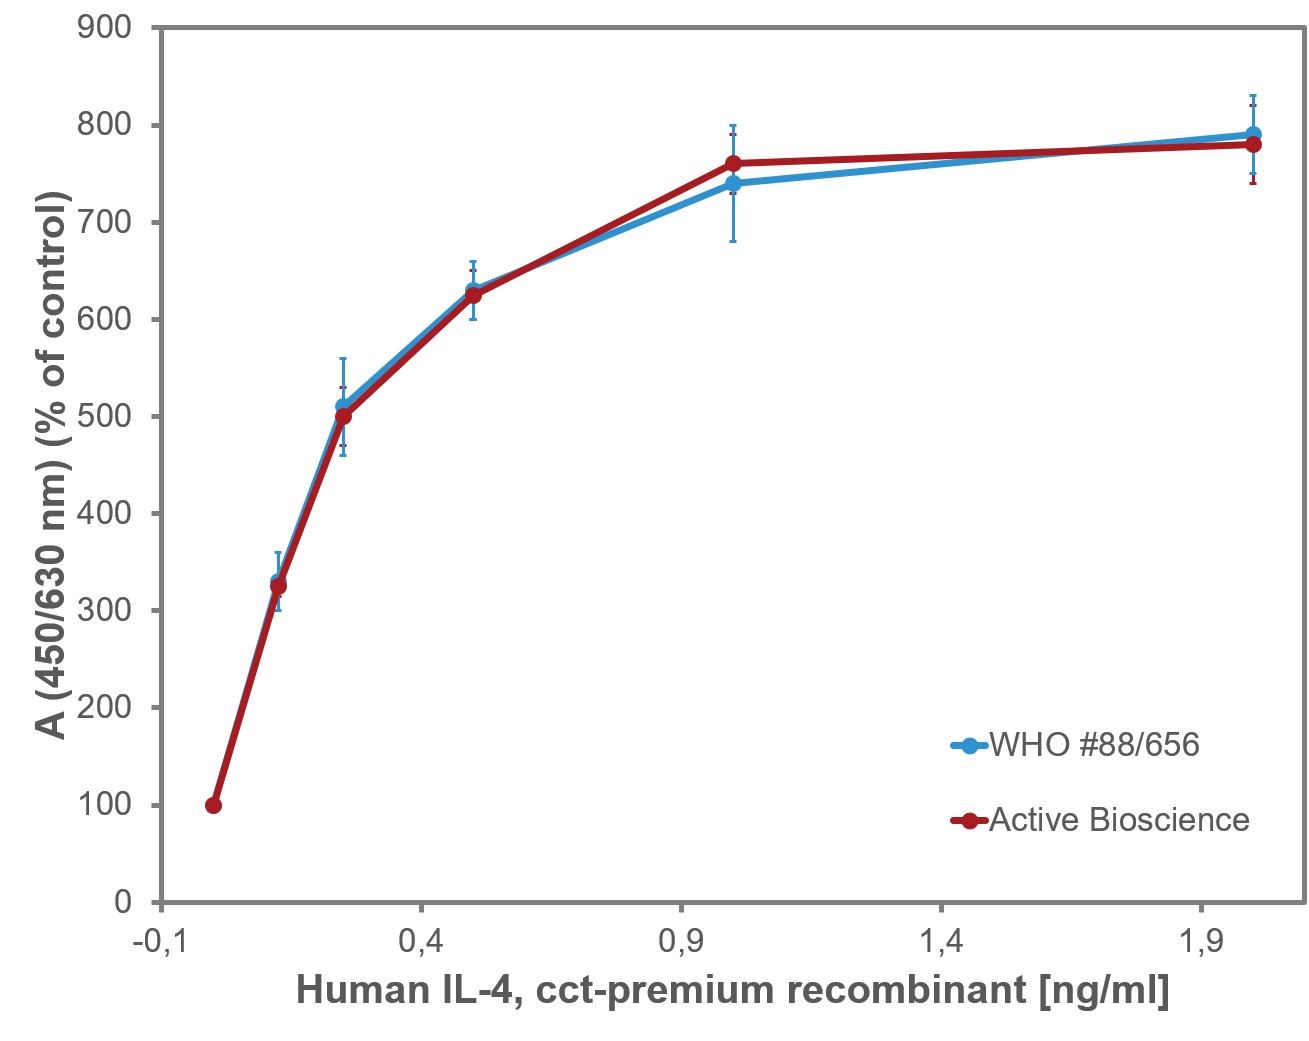 <strong>Fig. 2</strong>: Proliferation assay with TF-1 cells. The cells were stimulated using recombinant human IL-4, cct-premium and the WHO standard 88/656. The cells were stimulated with increasing amounts of the recombinant proteins. Values are the means (±SD) of triplicate determinations and expressed as percentage of control.